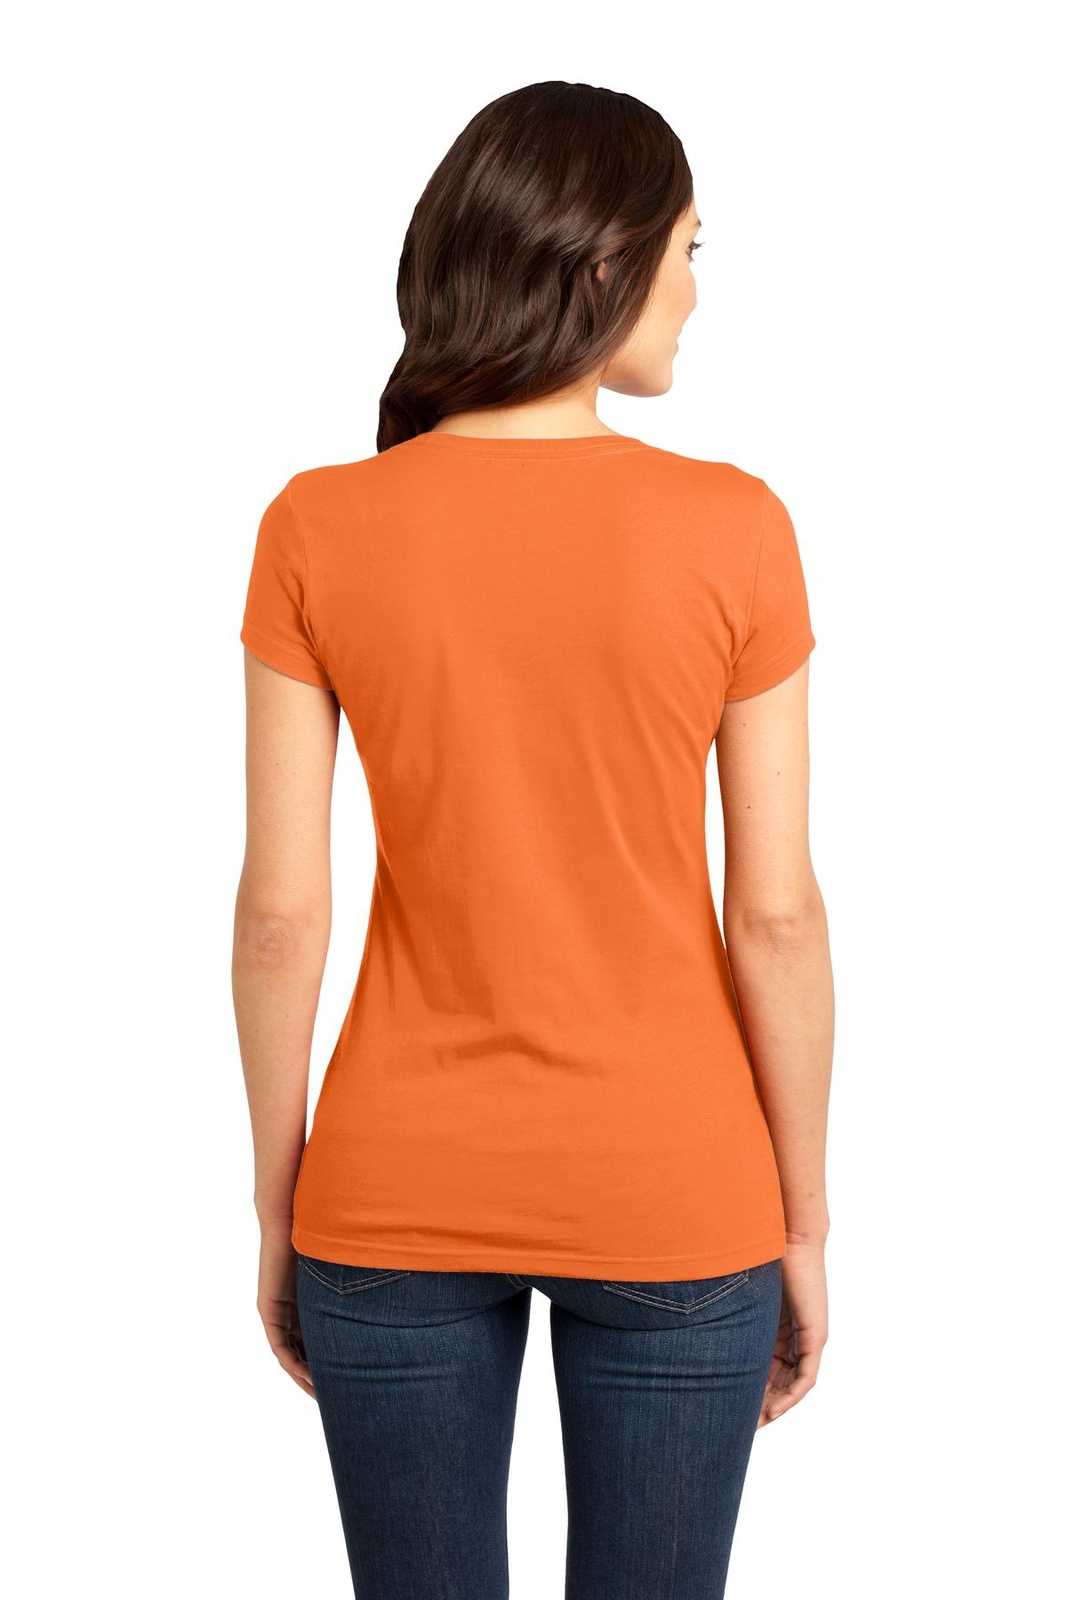 District DT6001 Women's Fitted Very Important Tee - Orange - HIT a Double - 1